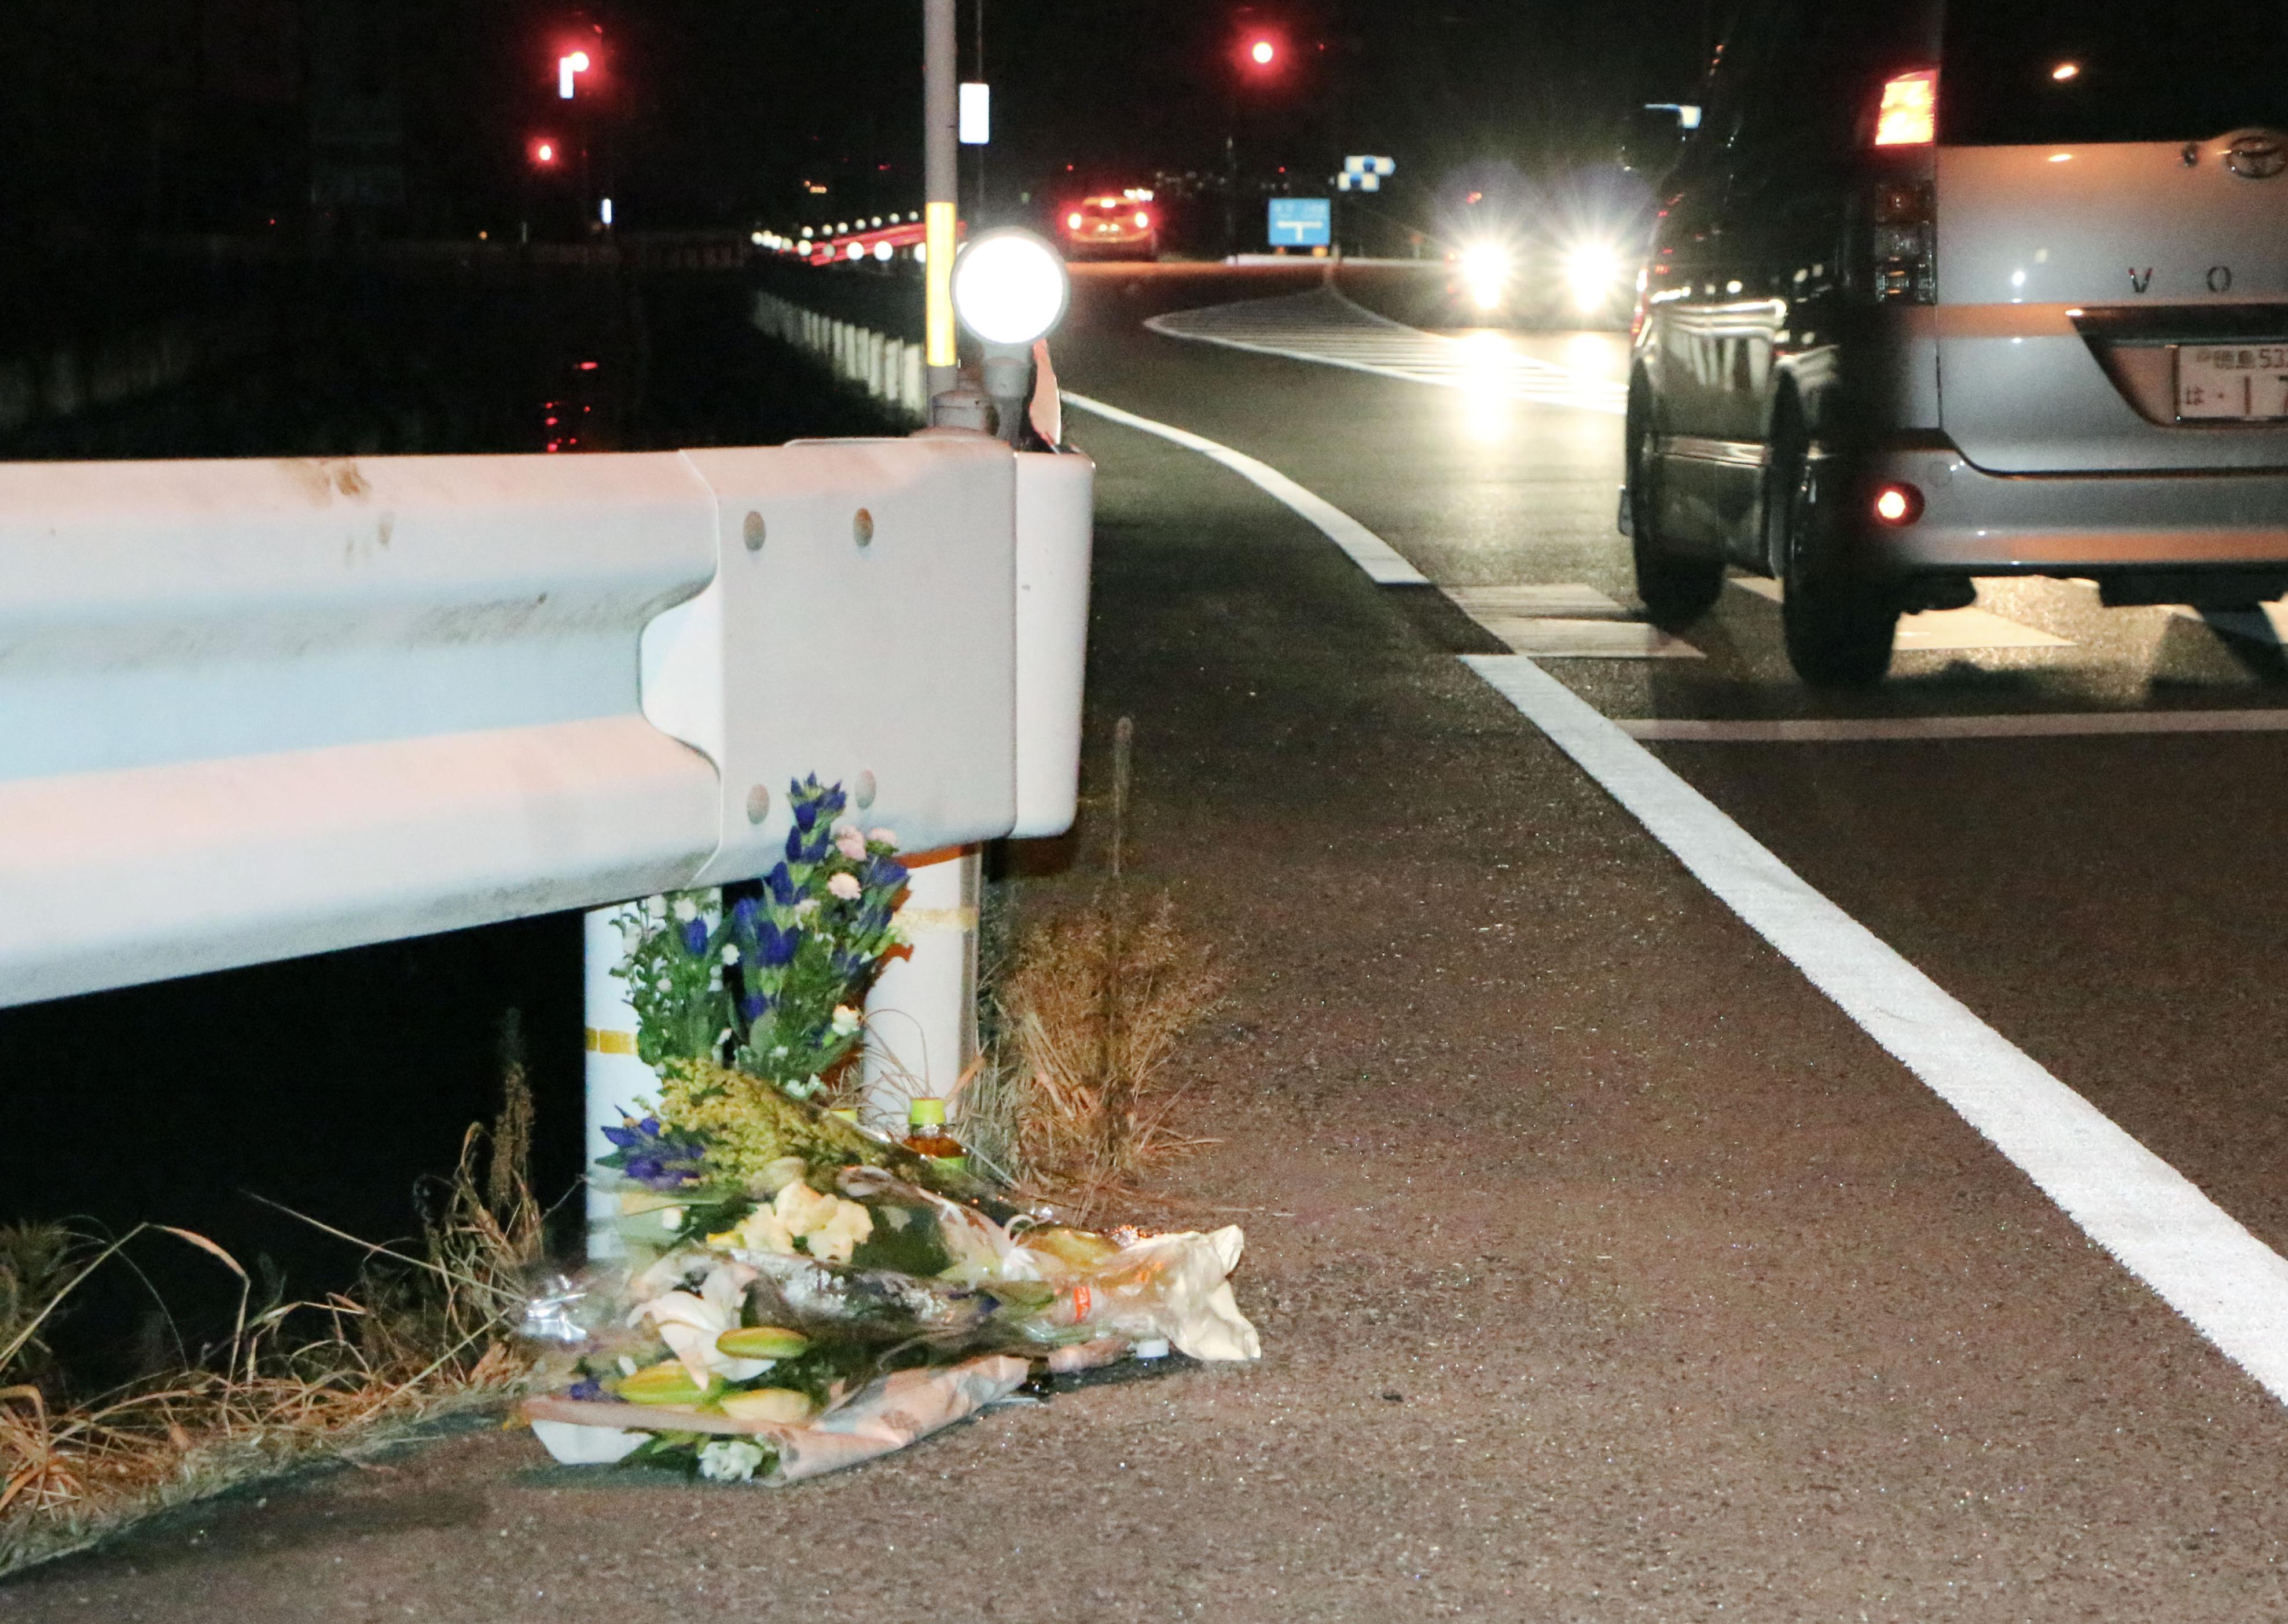 Flowers are laid in Tokushima, Japan, on Aug. 24, 2016, near the scene where a passer-by was killed in the first fatal accident in the country linked to a person playing the popular augmented-reality game "Pokemon Go" while driving. (Kyodo—Kyodo/AP)